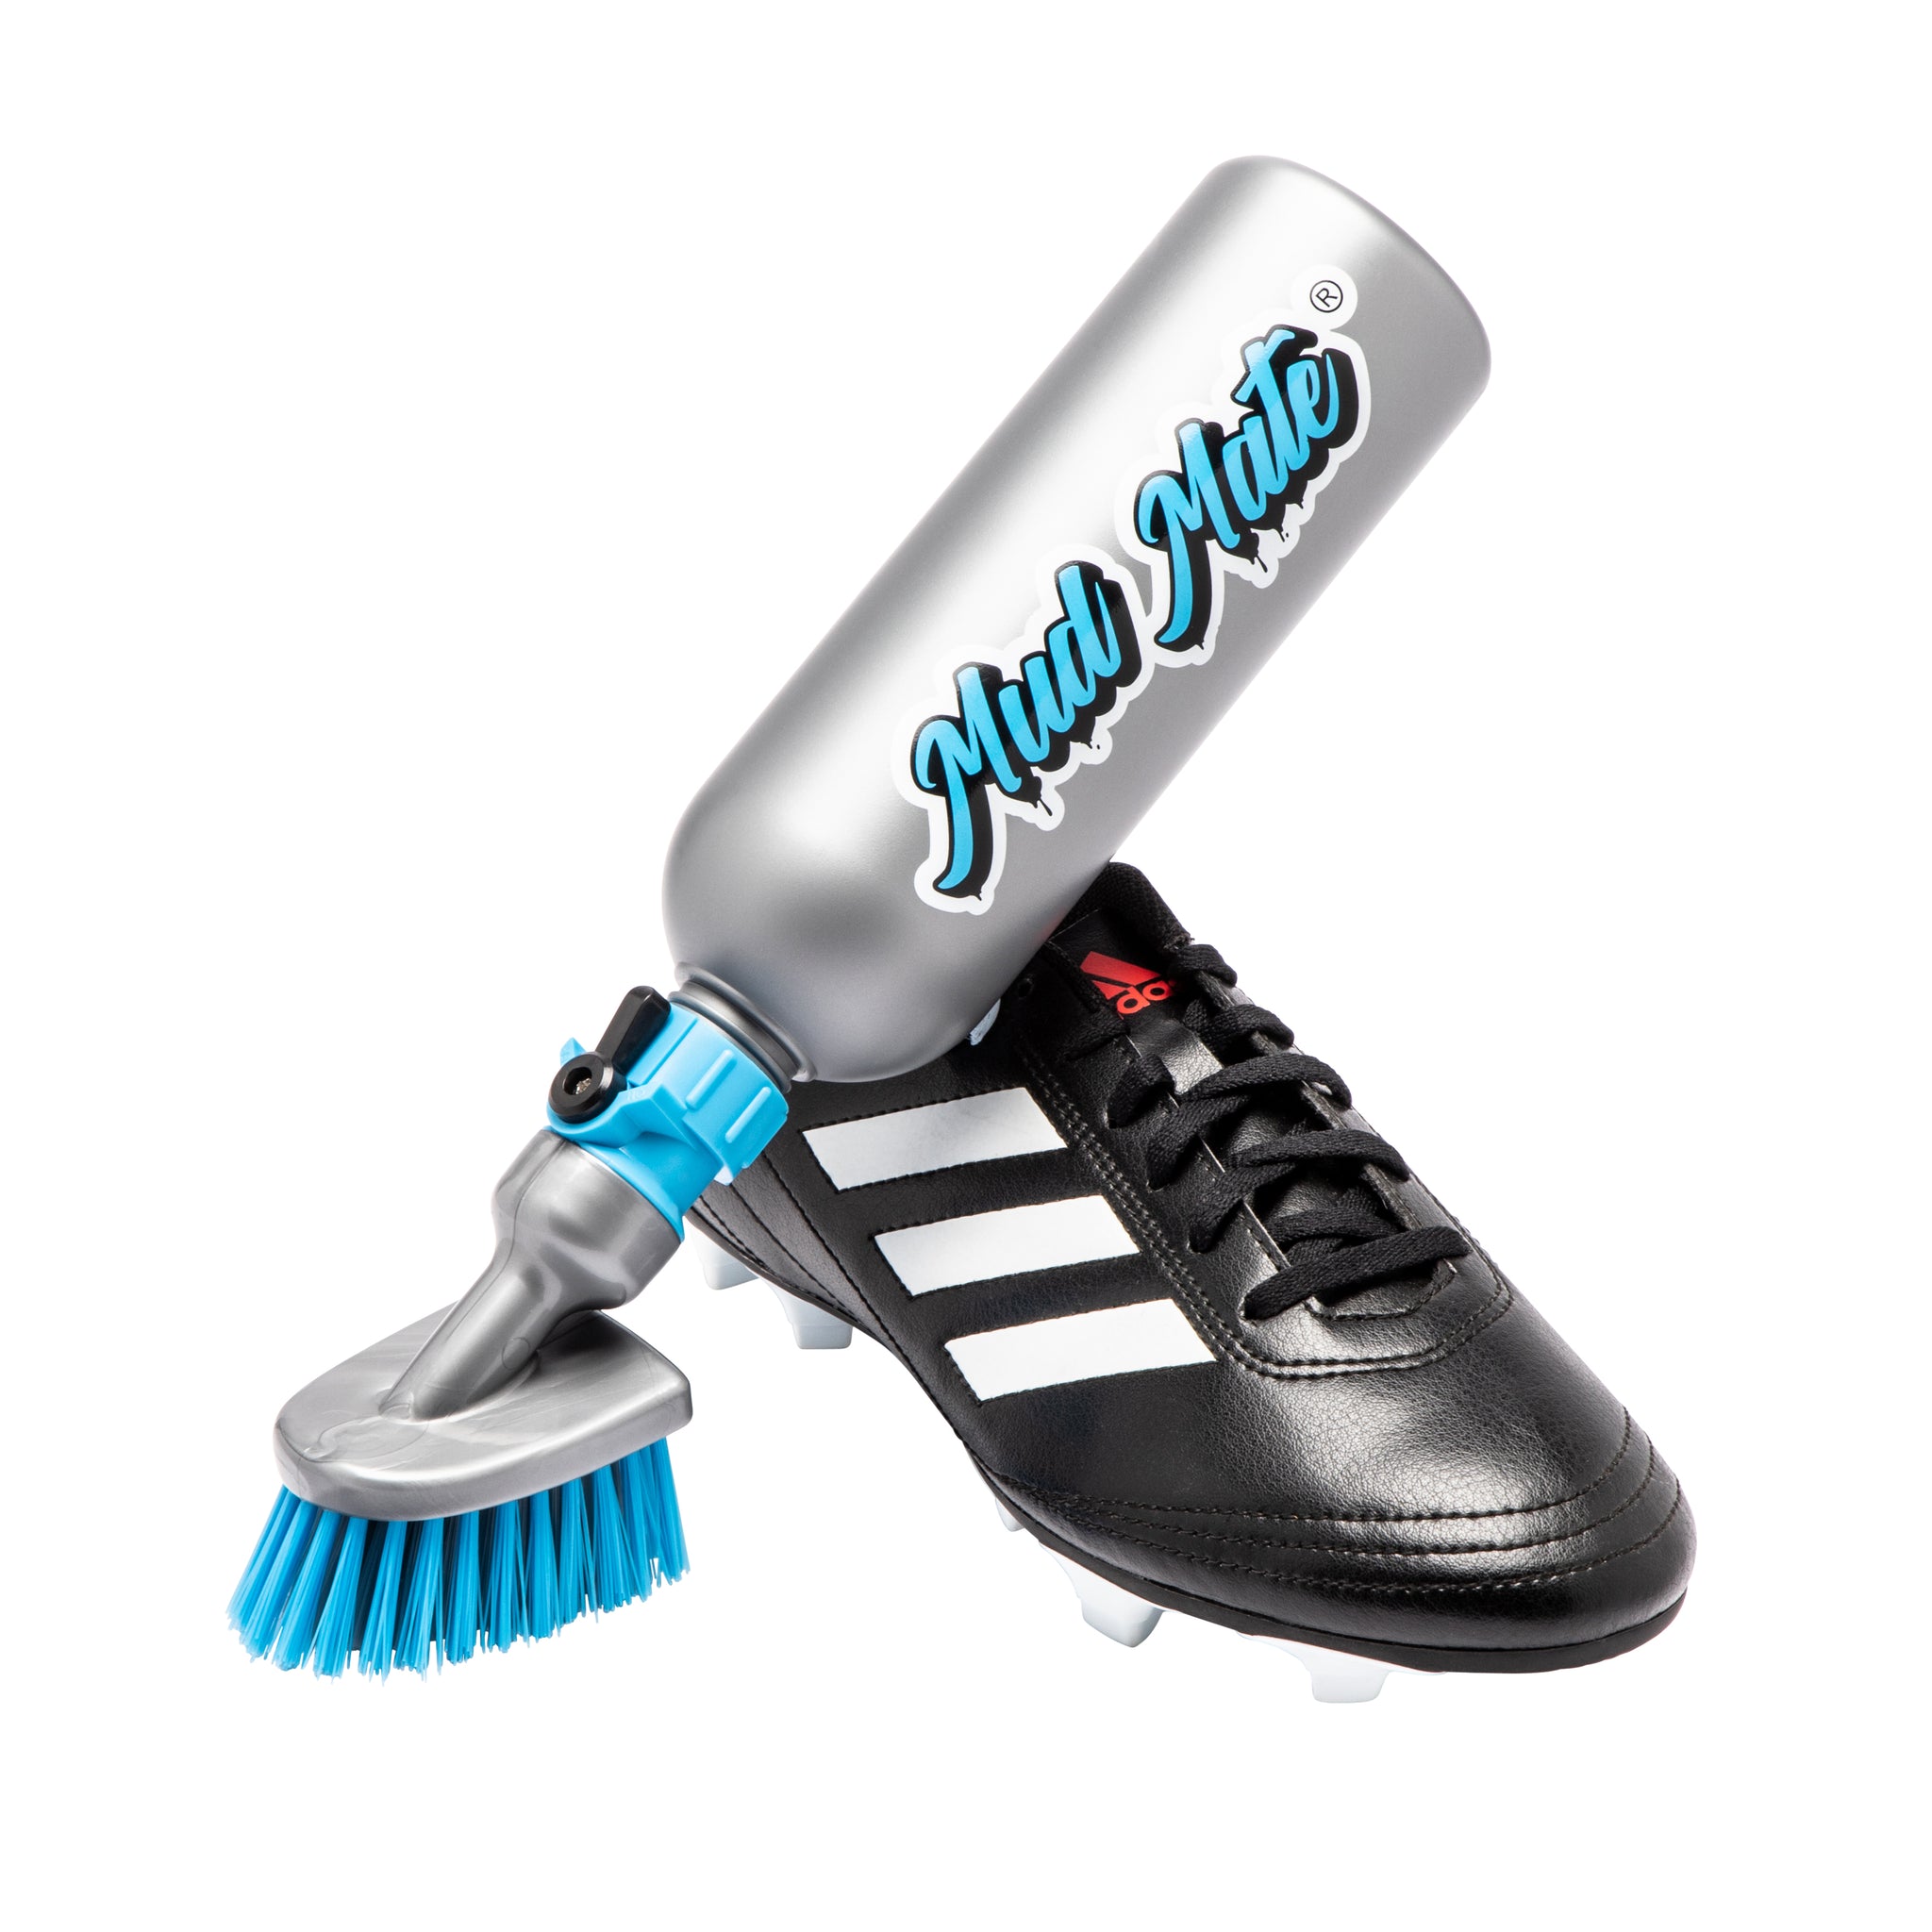 The double brush kit from Mud Mate is the most effective boot and shoe cleaning system available.